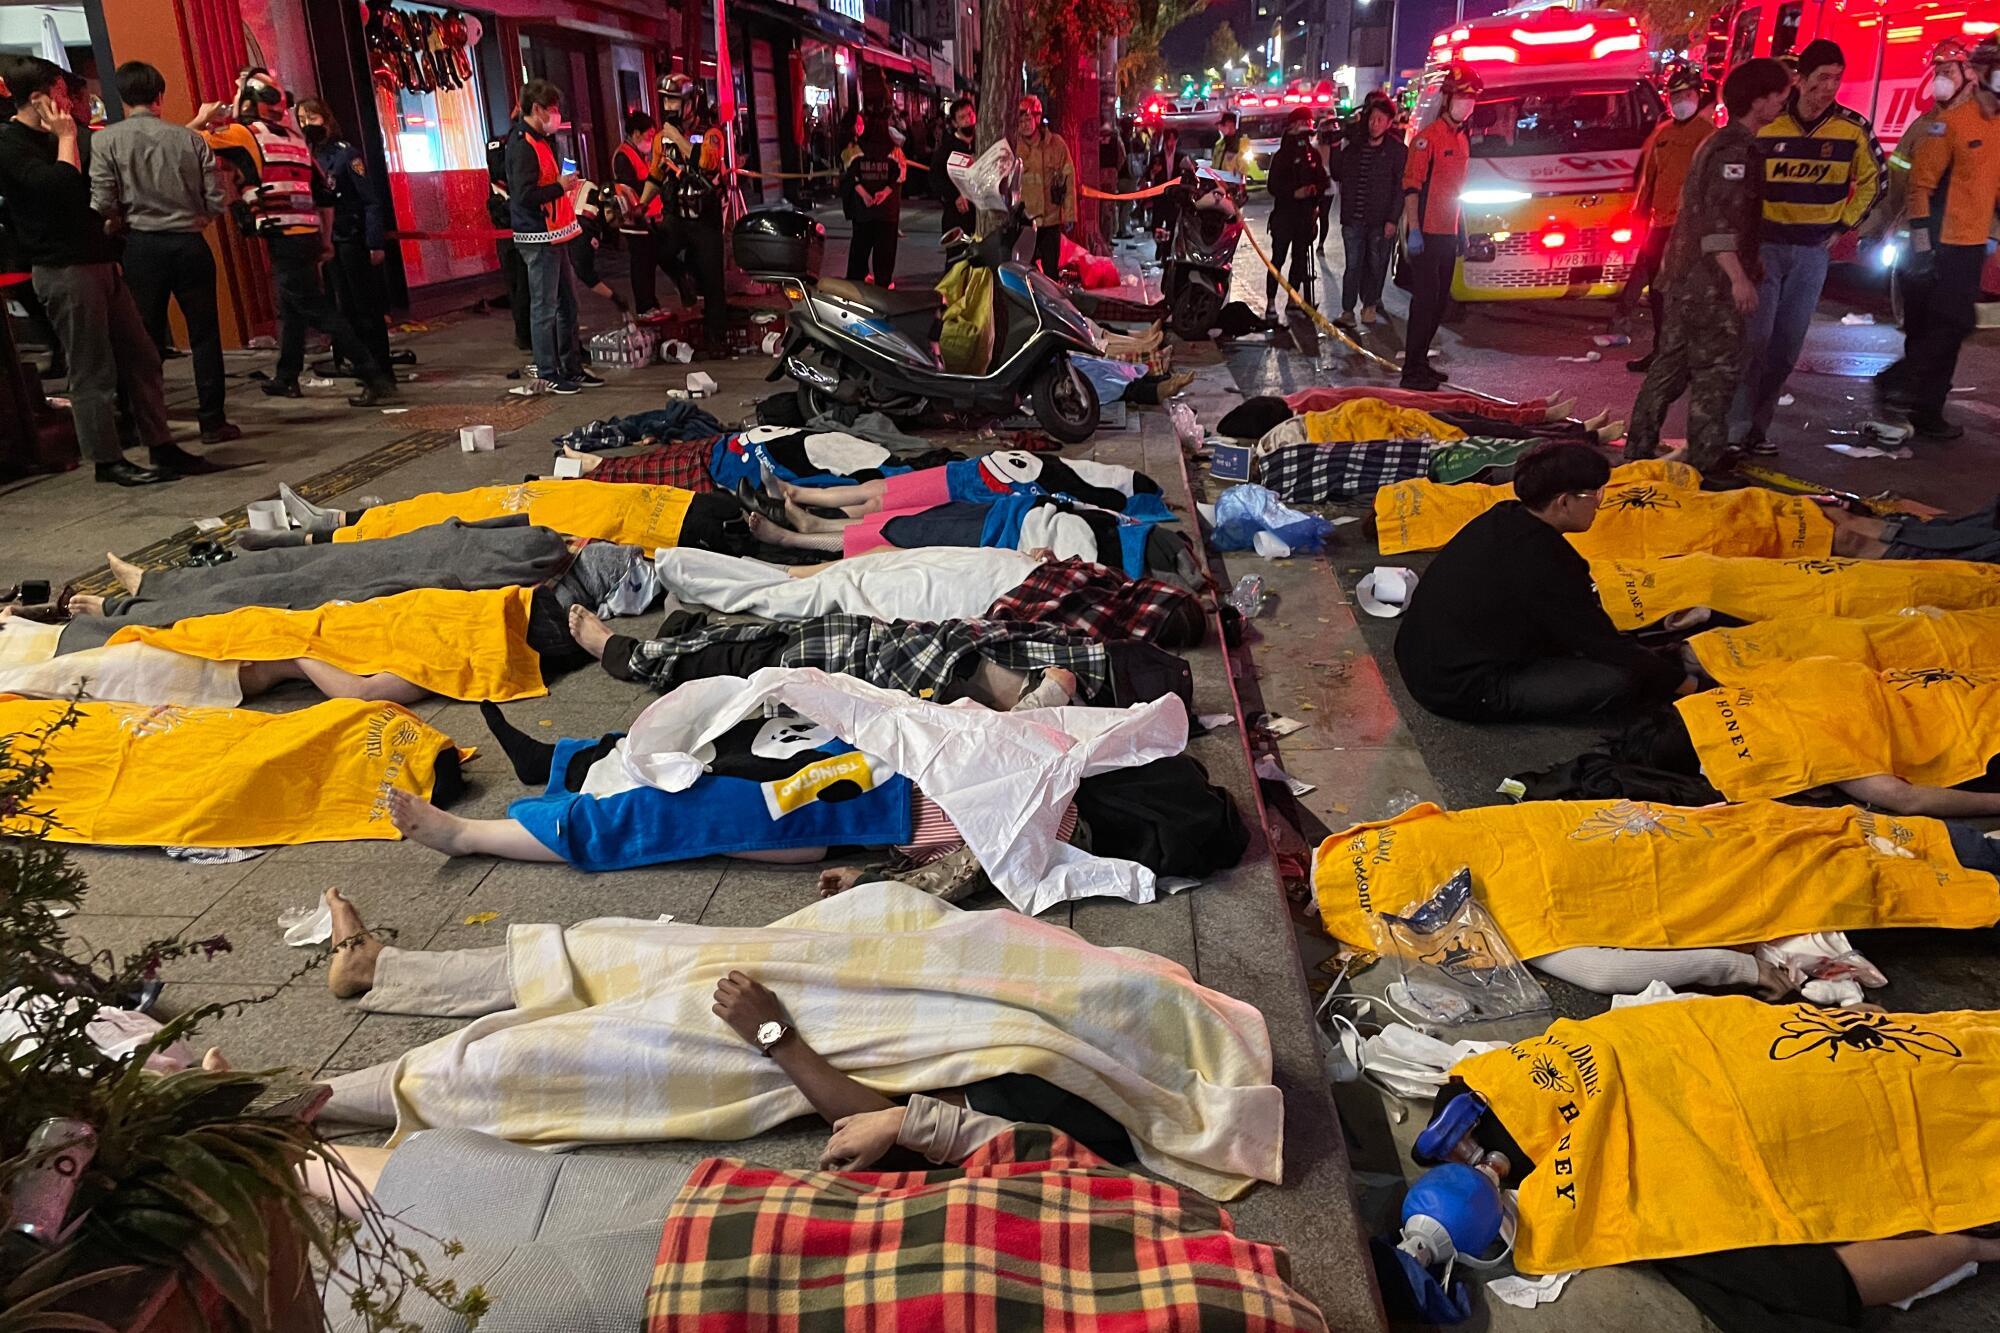  About 20 bodies lie covered on a street 